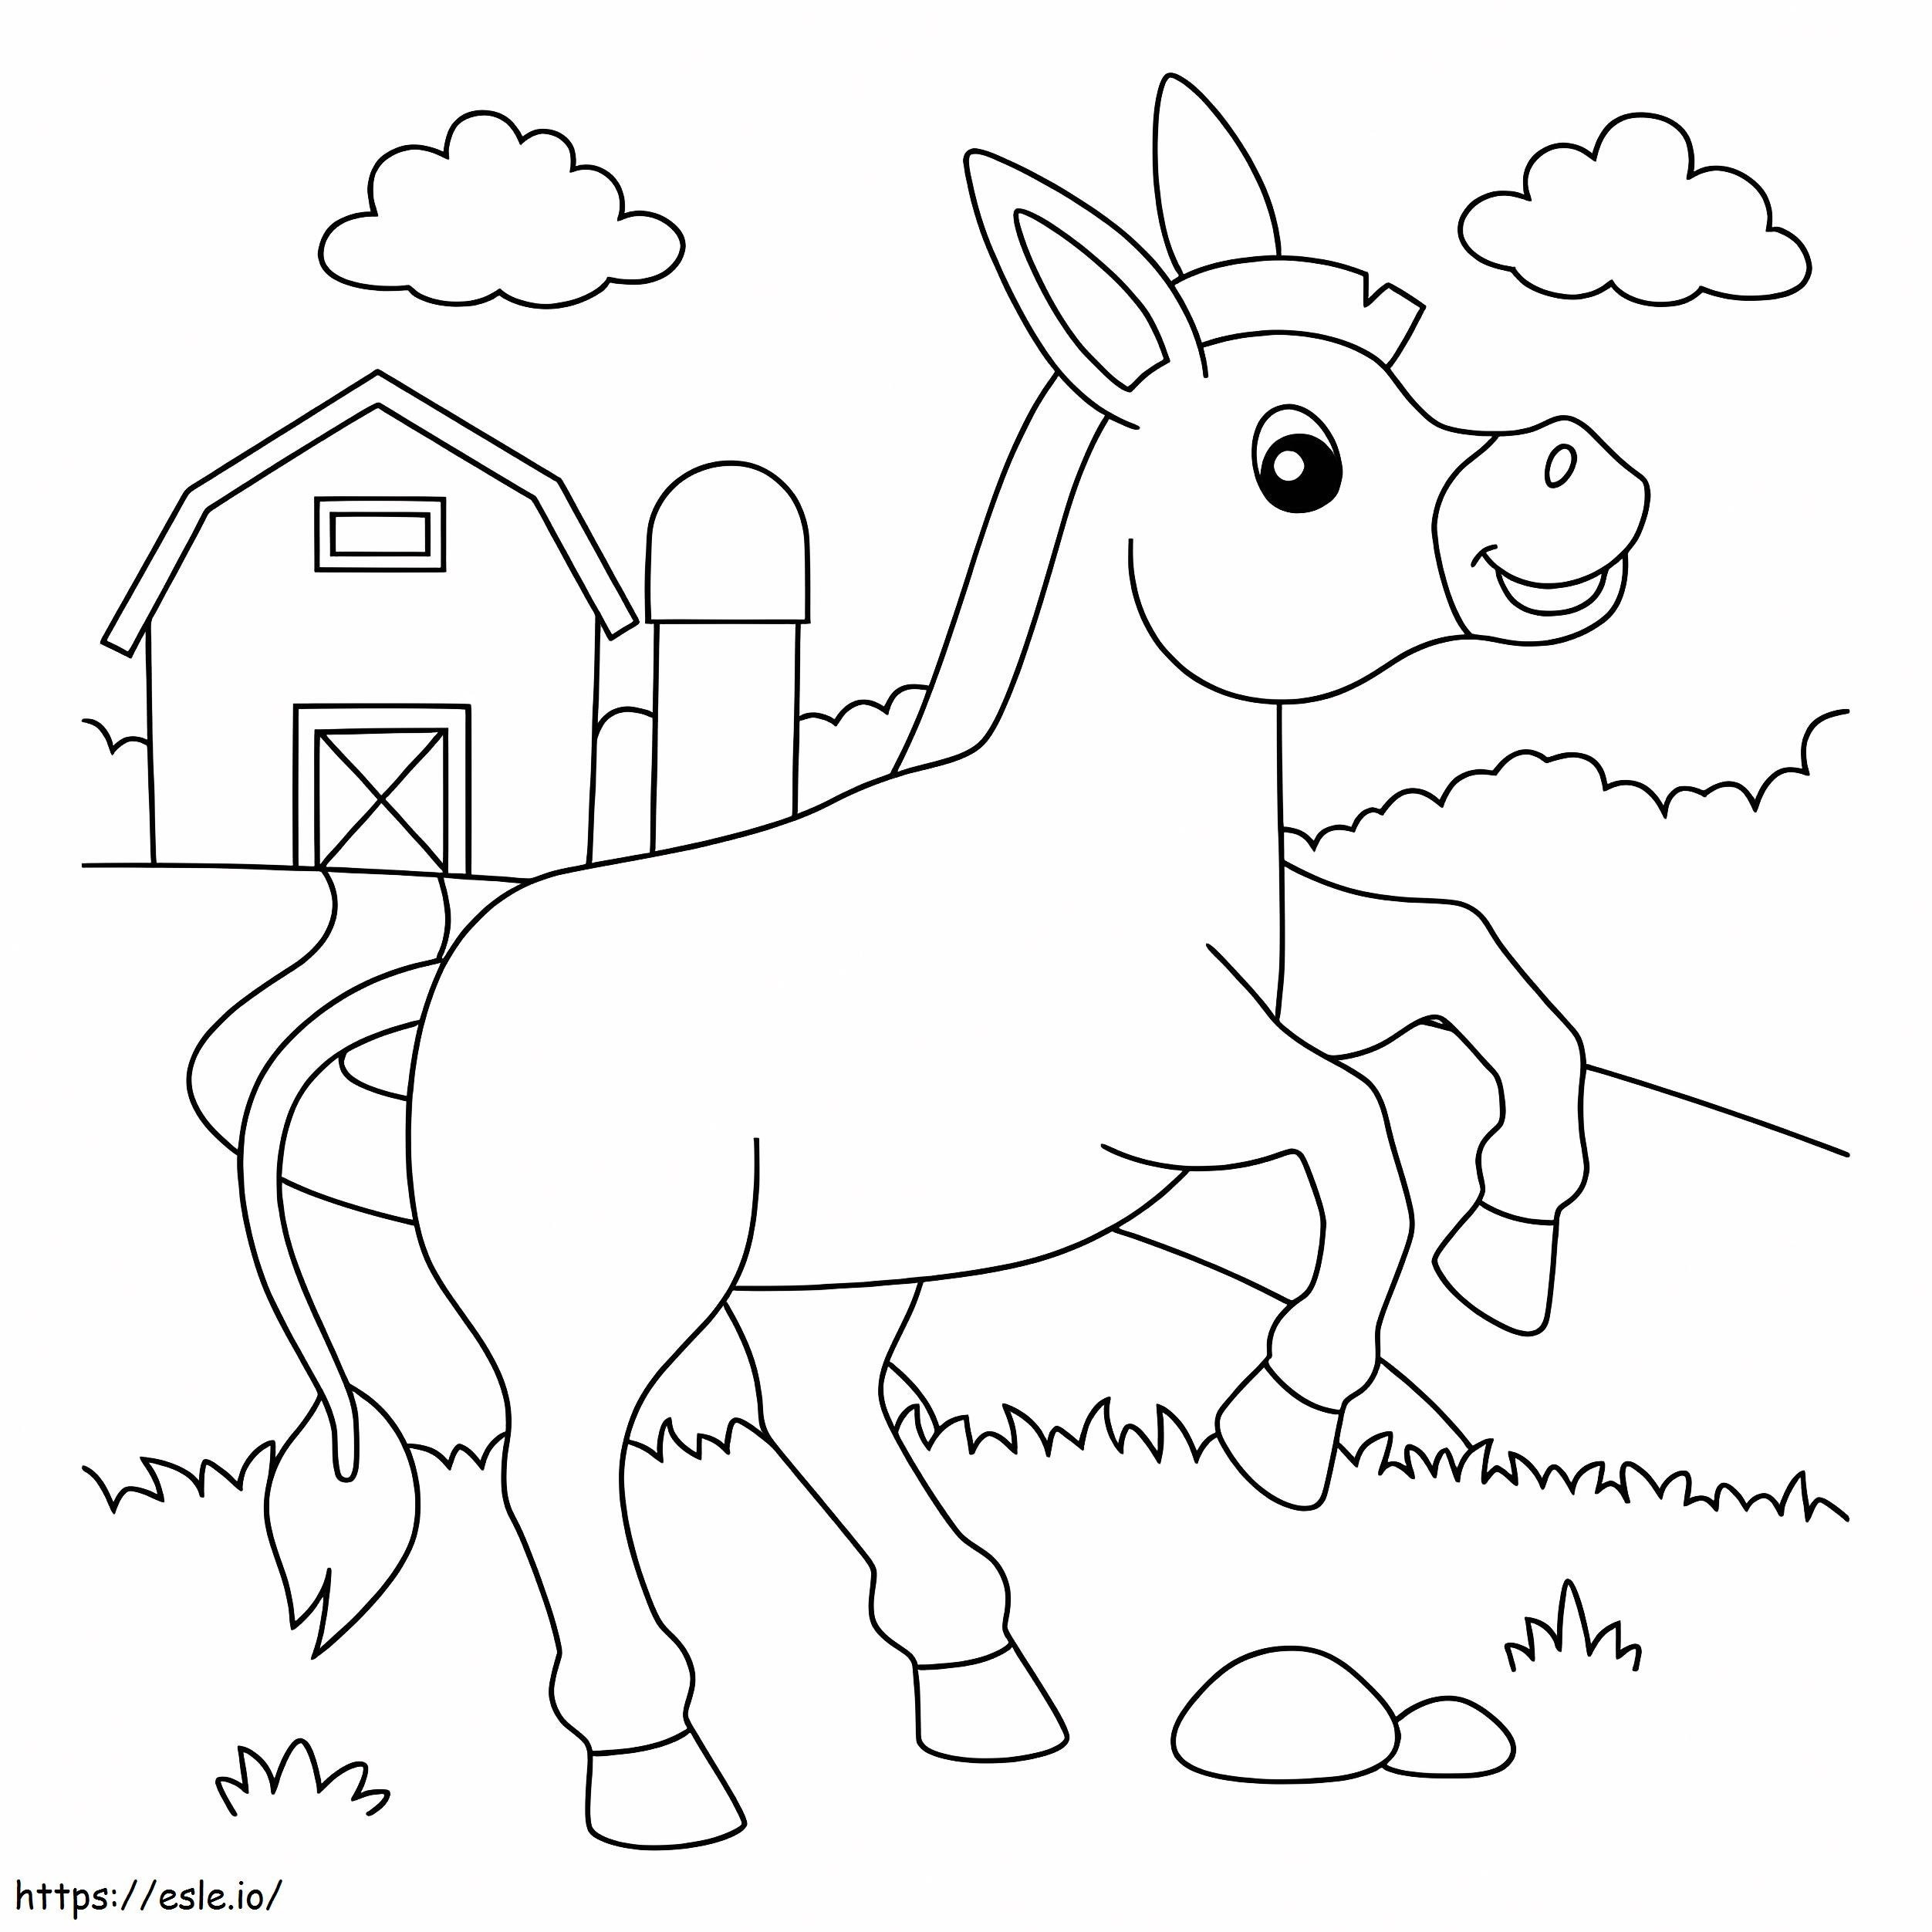 Donkey Near The Farm coloring page